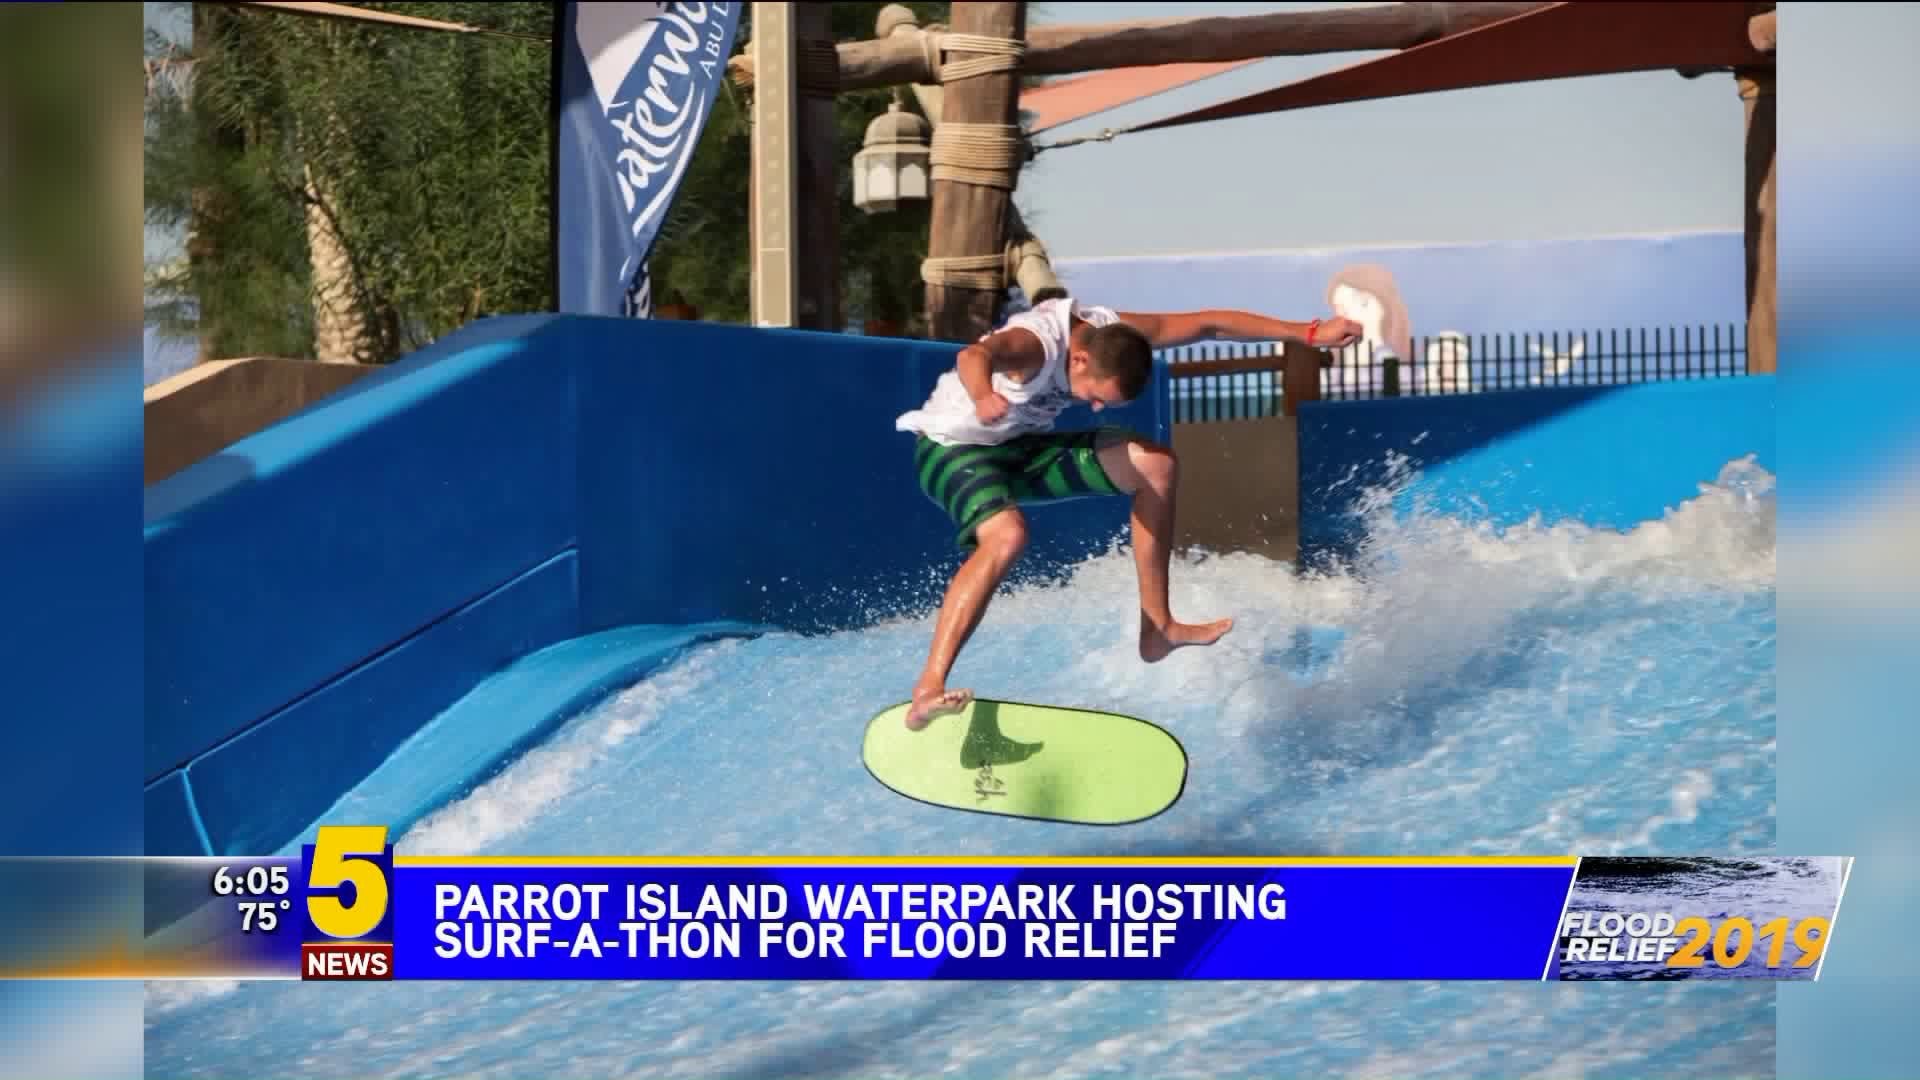 Parrot Island Hosting Surf-A-Thon for Flood Relief